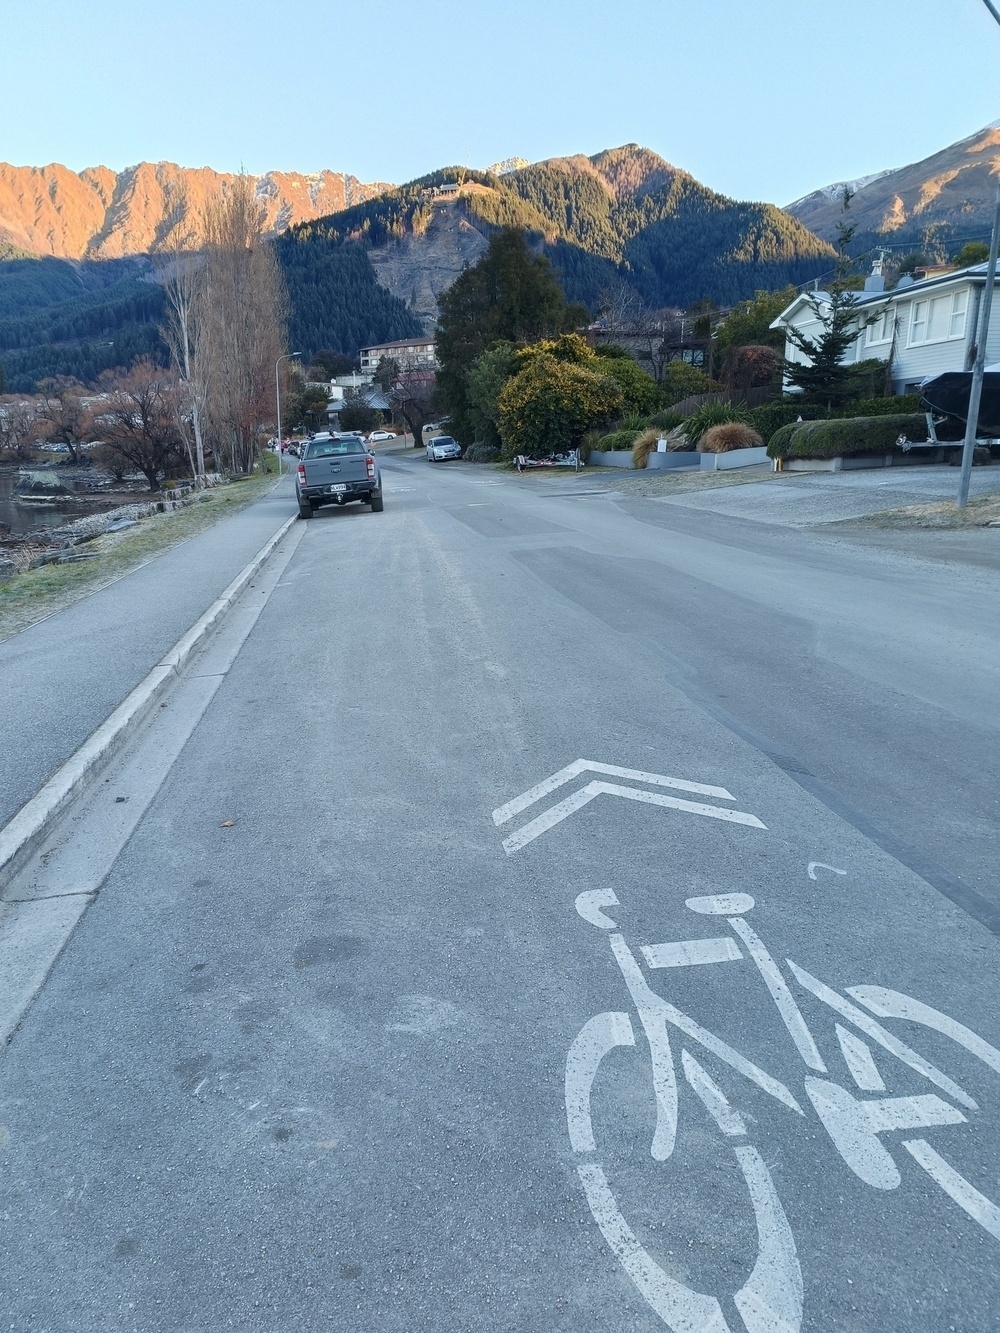 Cyclist symbol and forward arrow painted on road